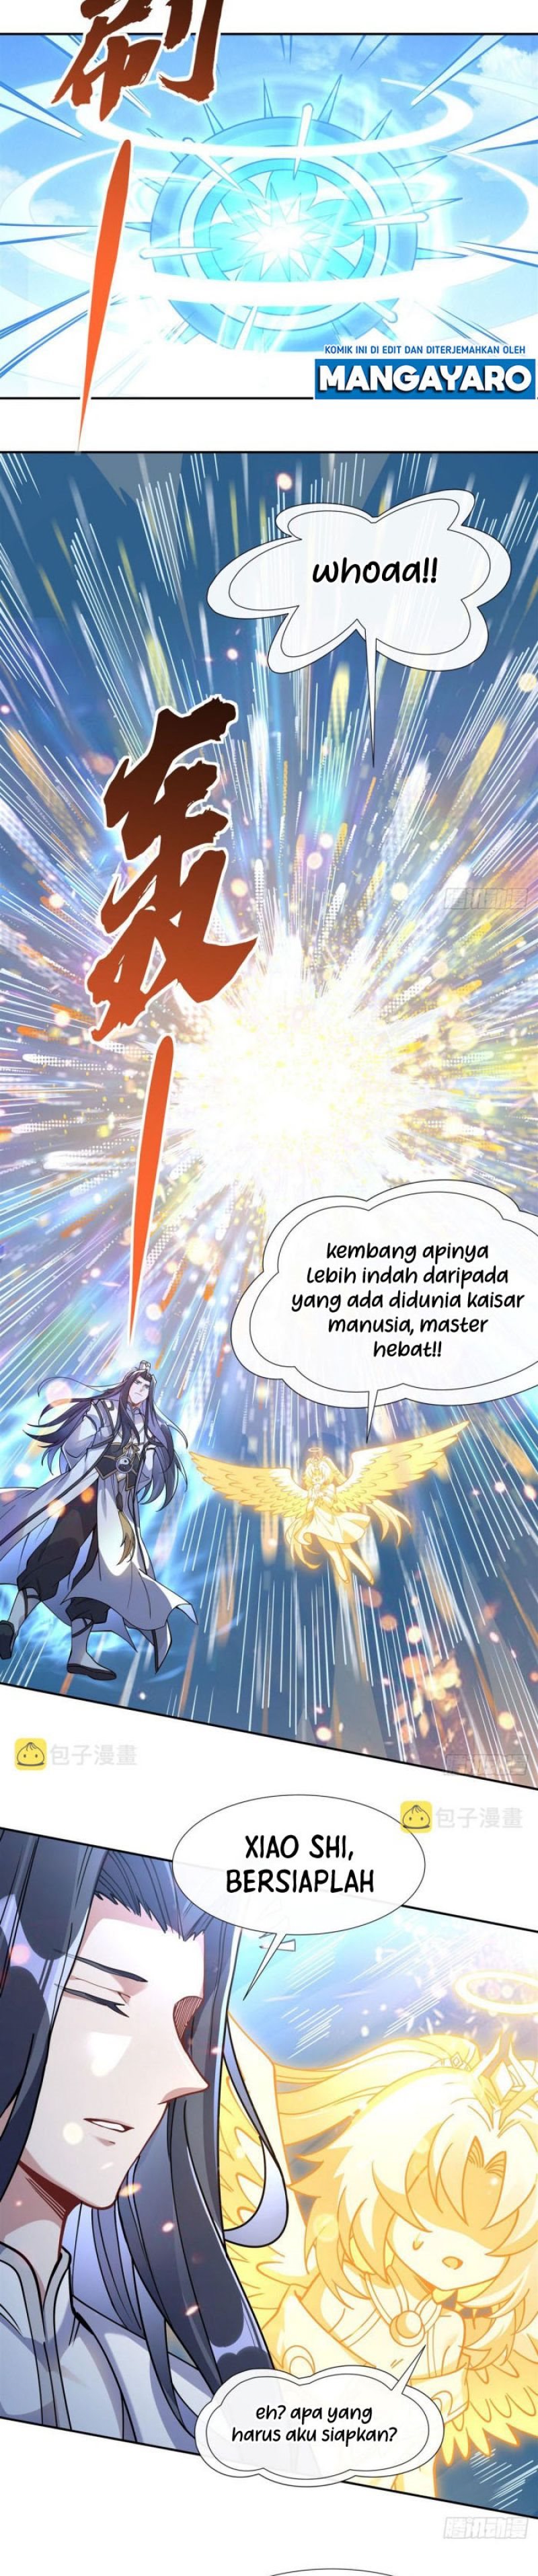 Dilarang COPAS - situs resmi www.mangacanblog.com - Komik my female apprentices are all big shots from the future 135 - chapter 135 136 Indonesia my female apprentices are all big shots from the future 135 - chapter 135 Terbaru 8|Baca Manga Komik Indonesia|Mangacan